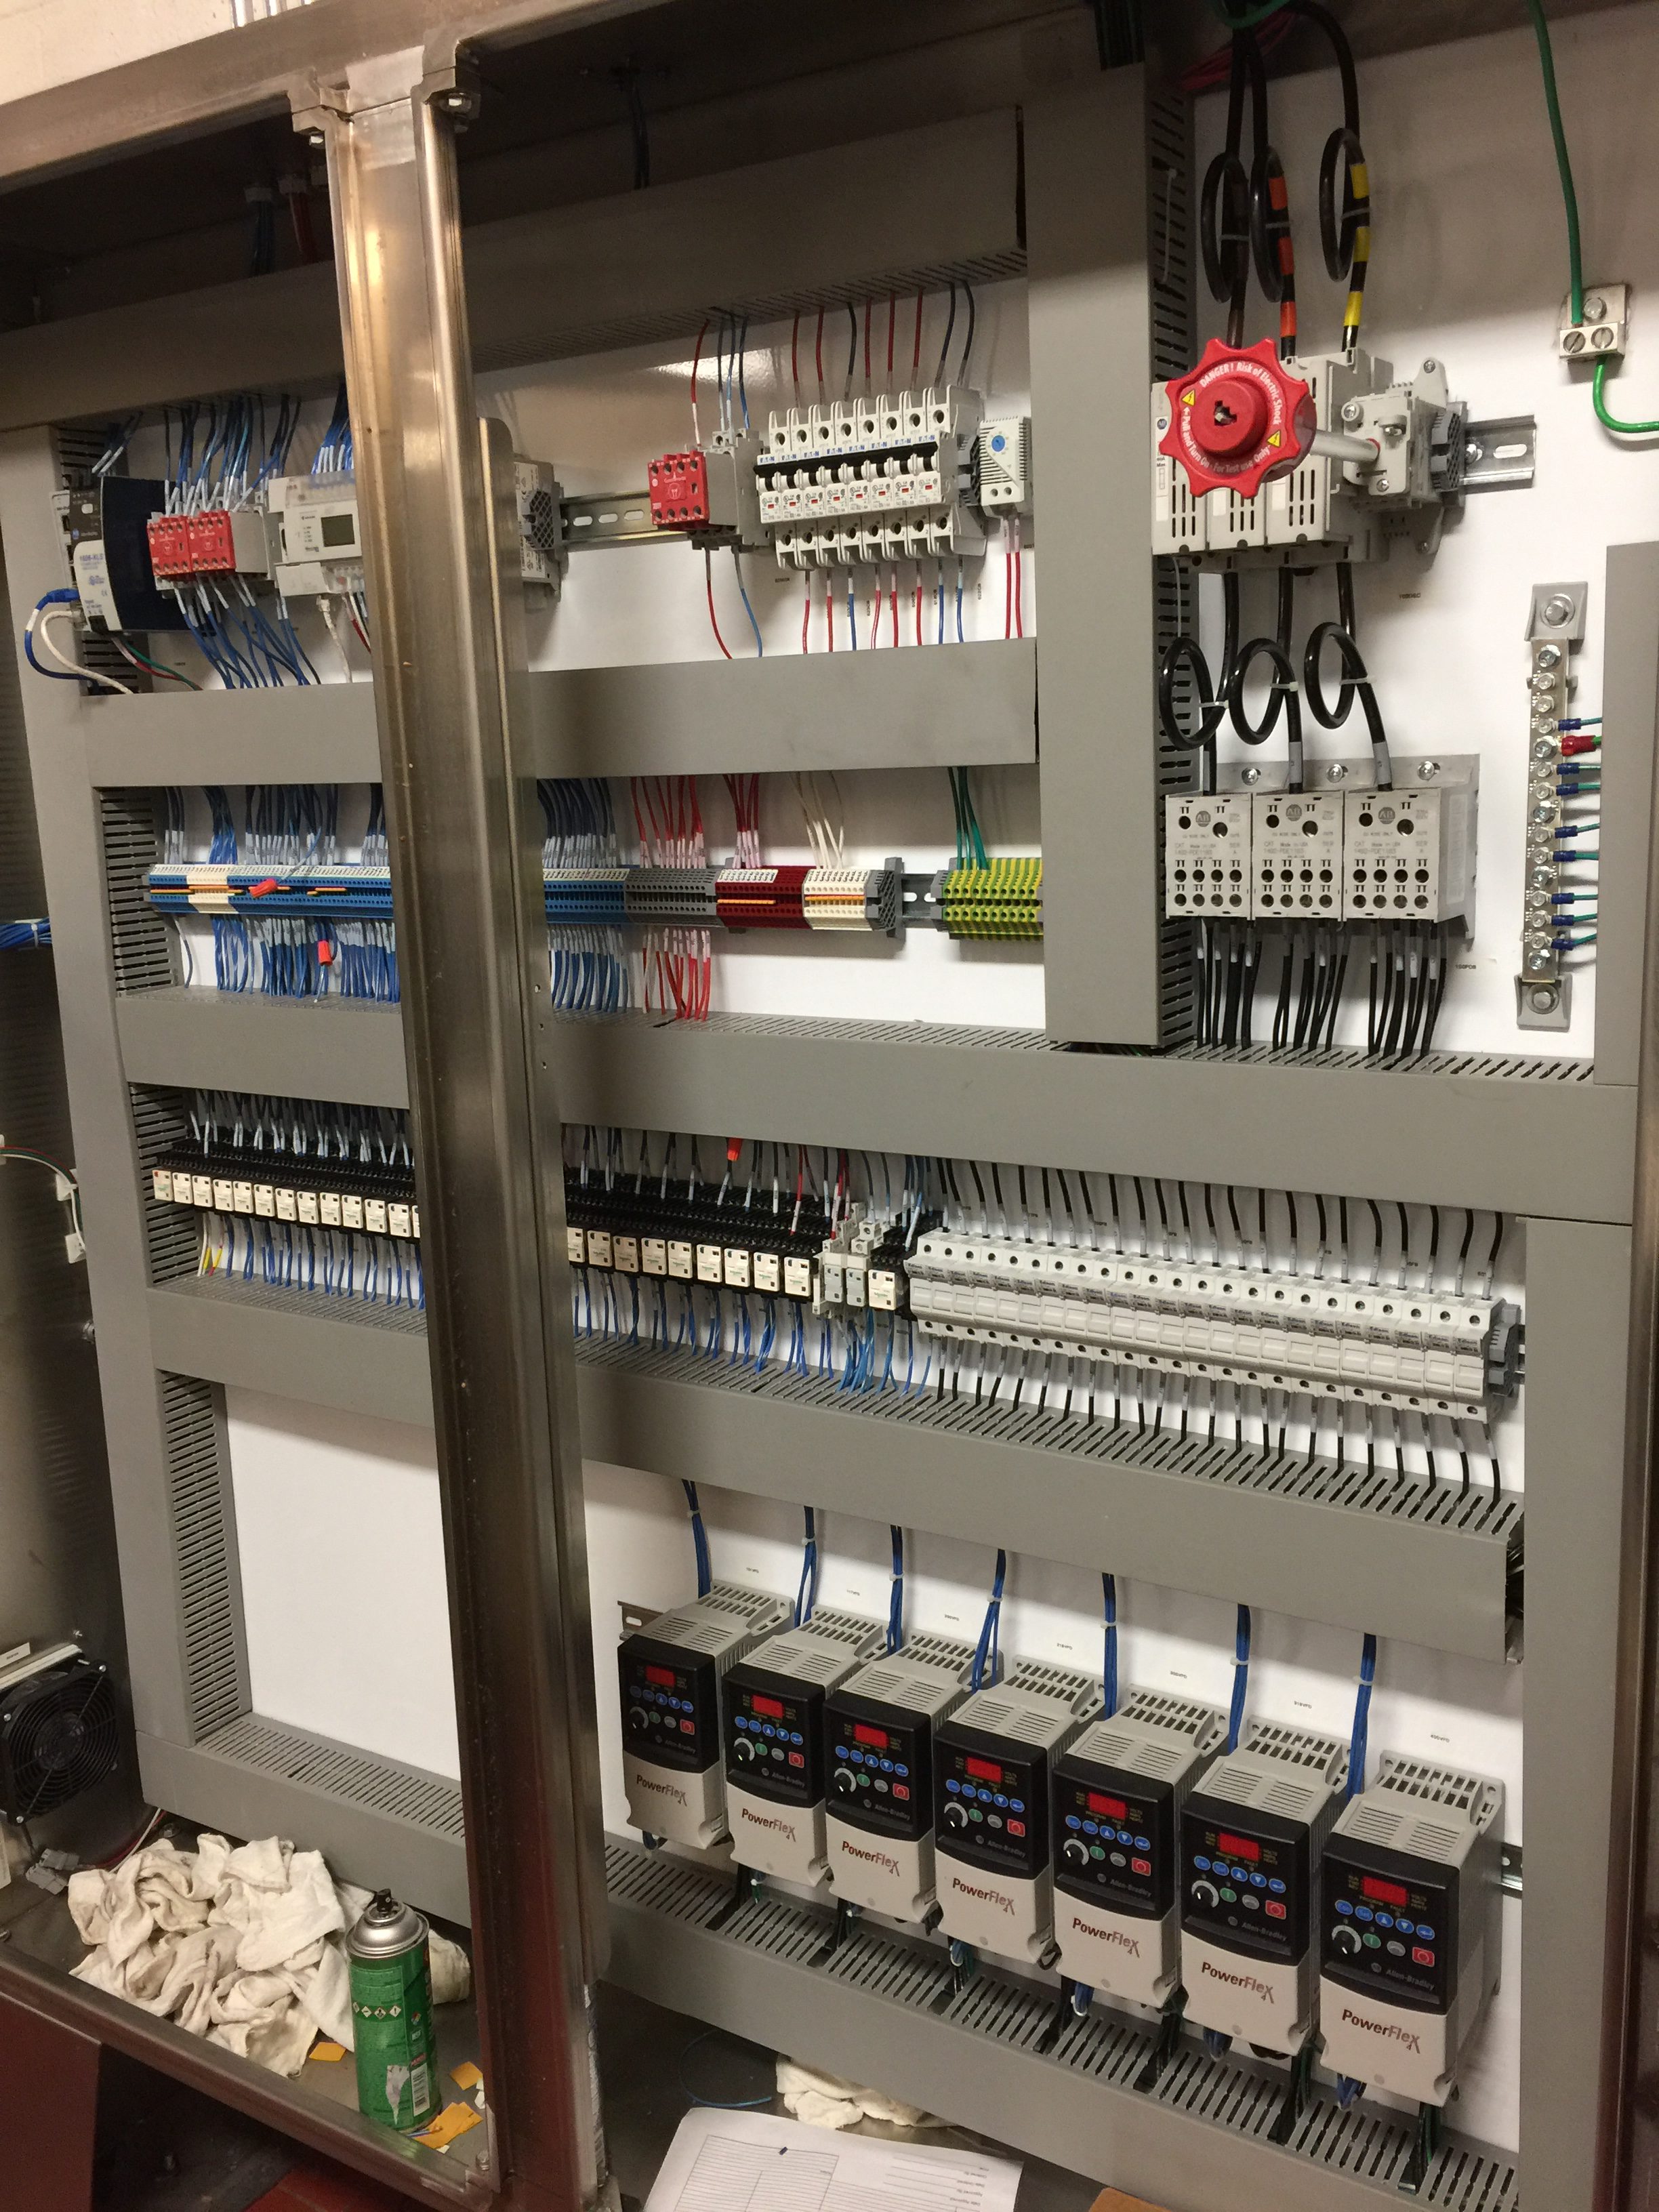 Shertzer Electric Control Panel for Process Conveyors